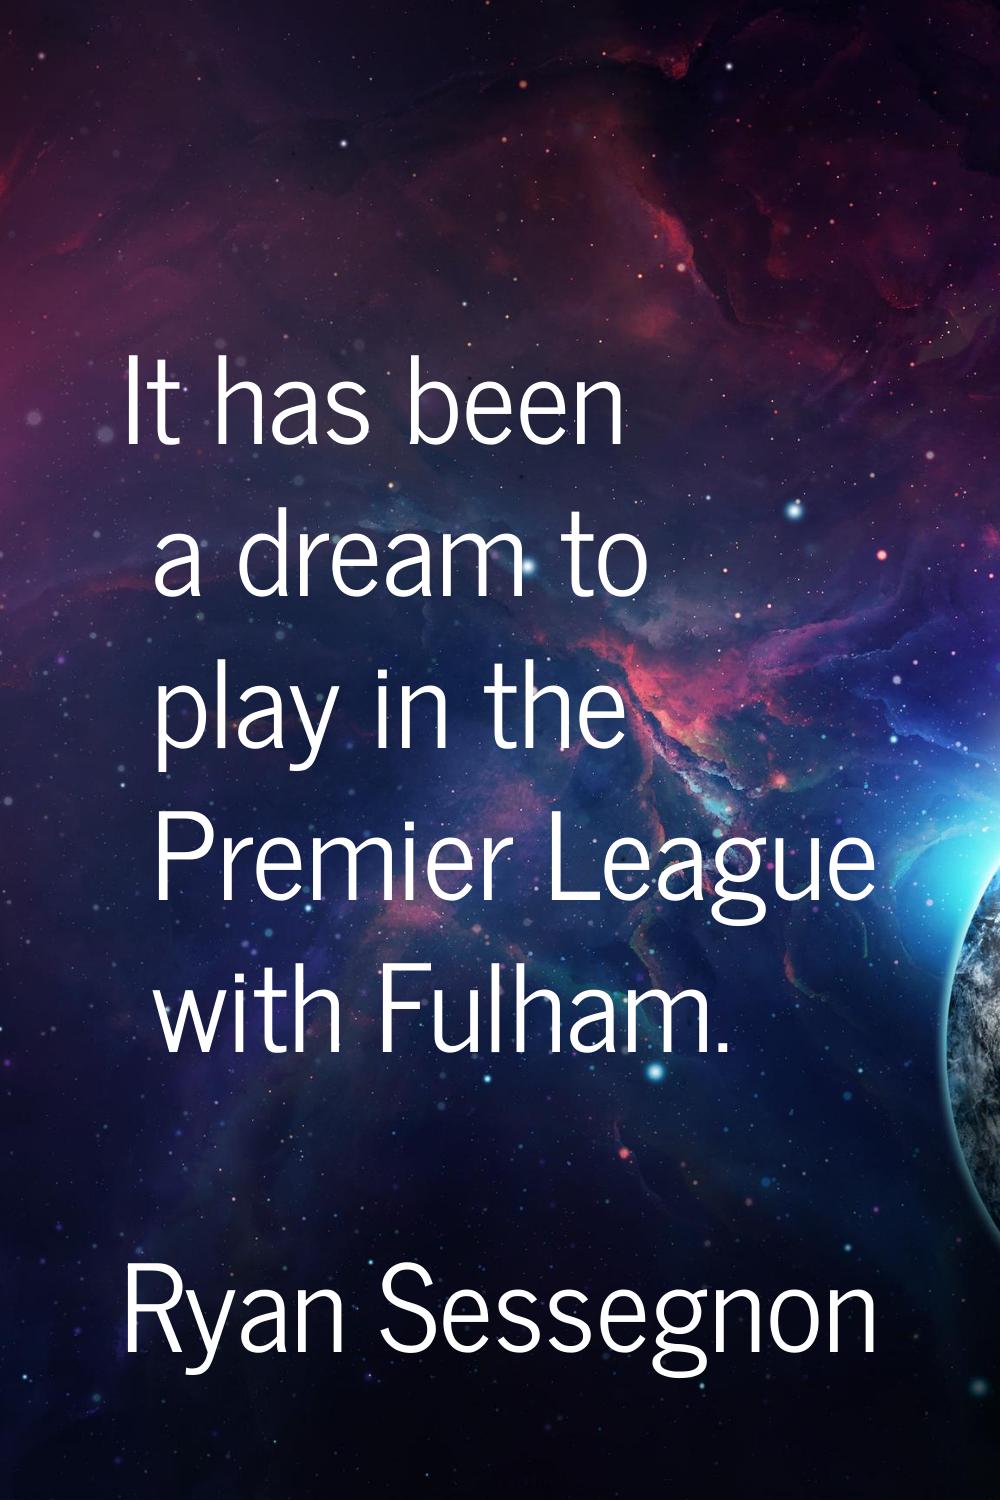 It has been a dream to play in the Premier League with Fulham.